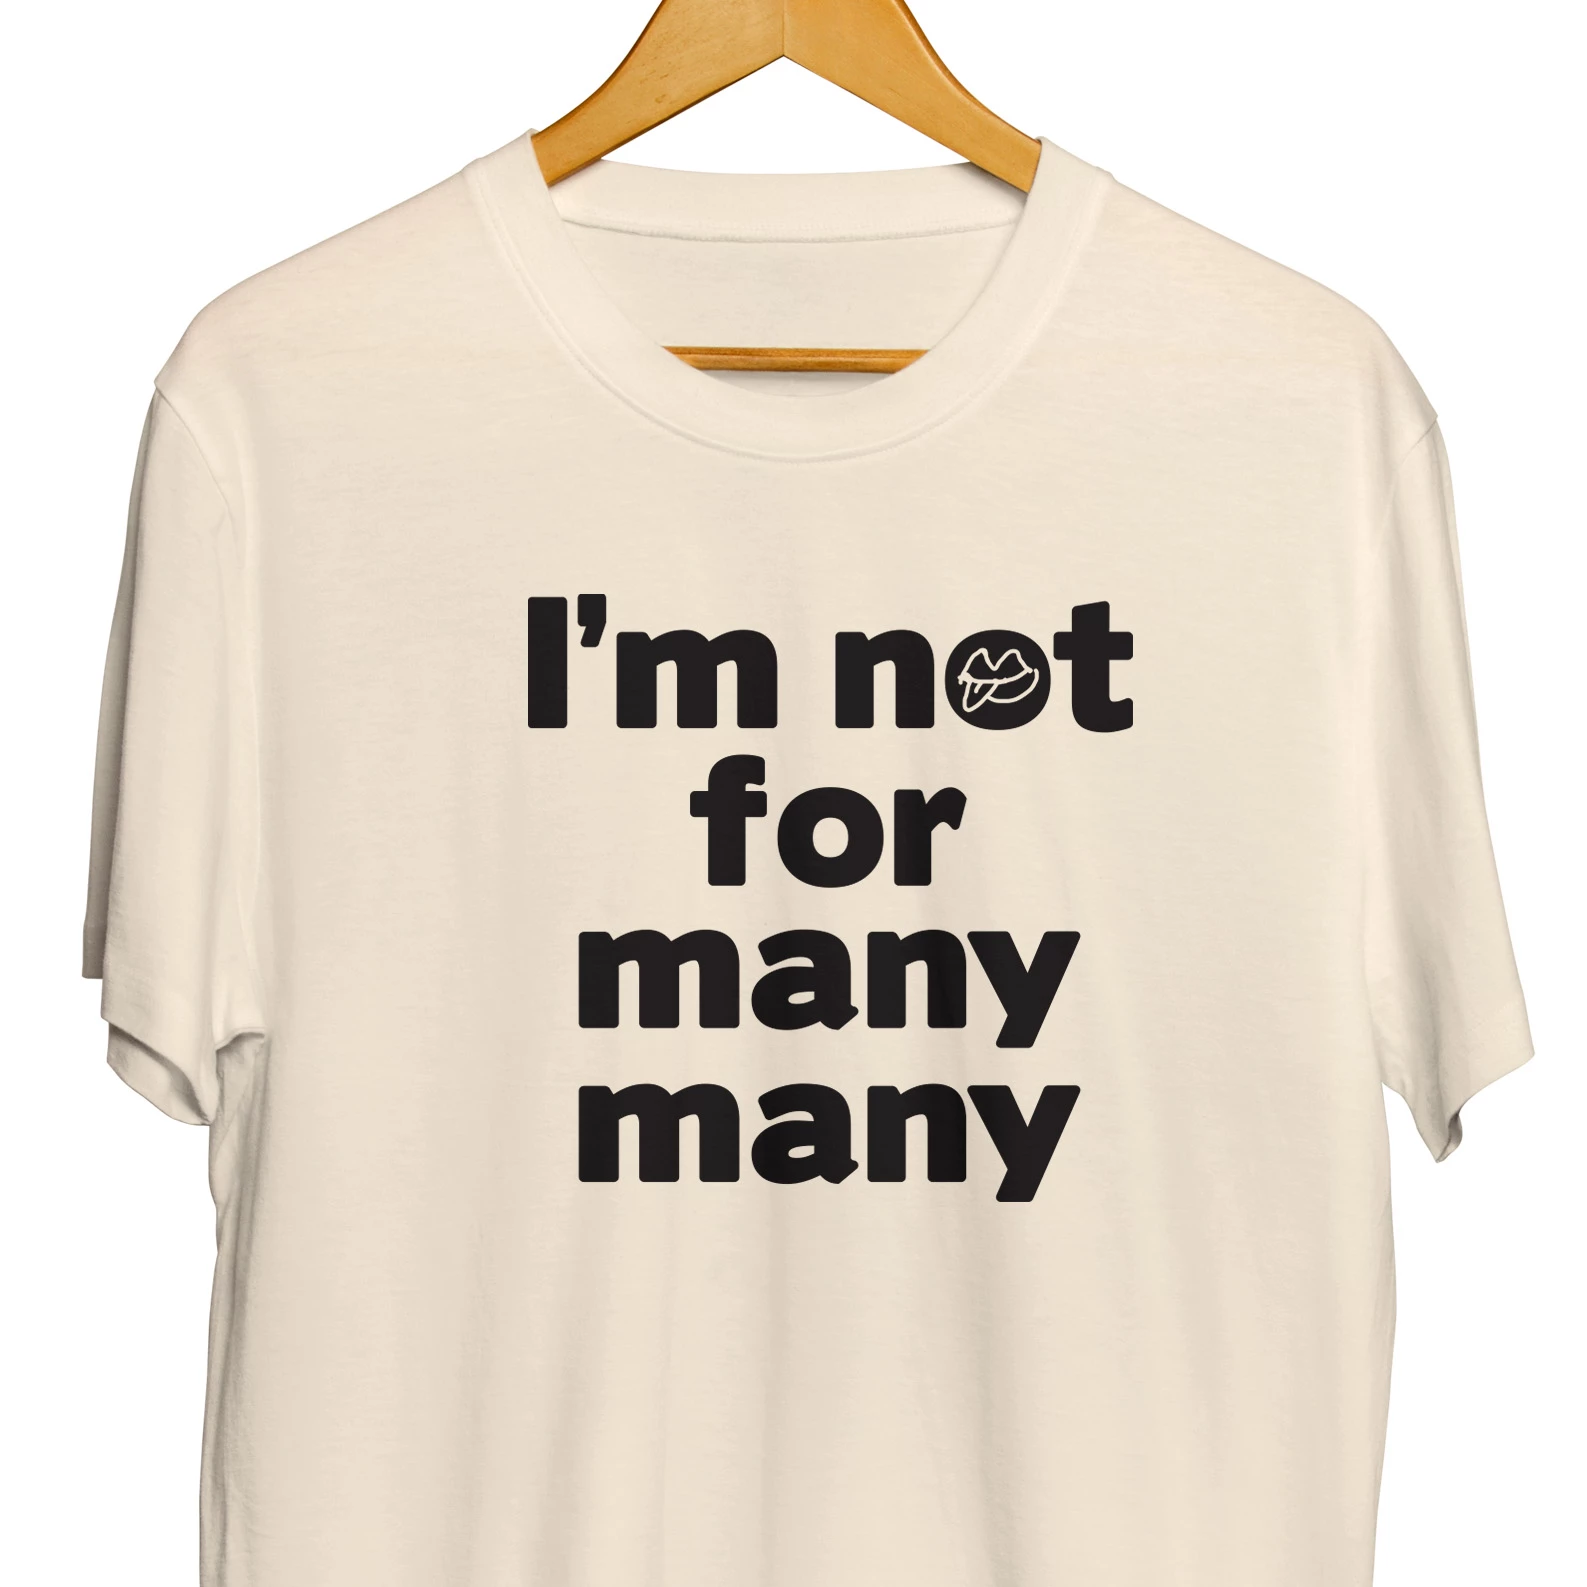 I’m not for many many - T-shirt